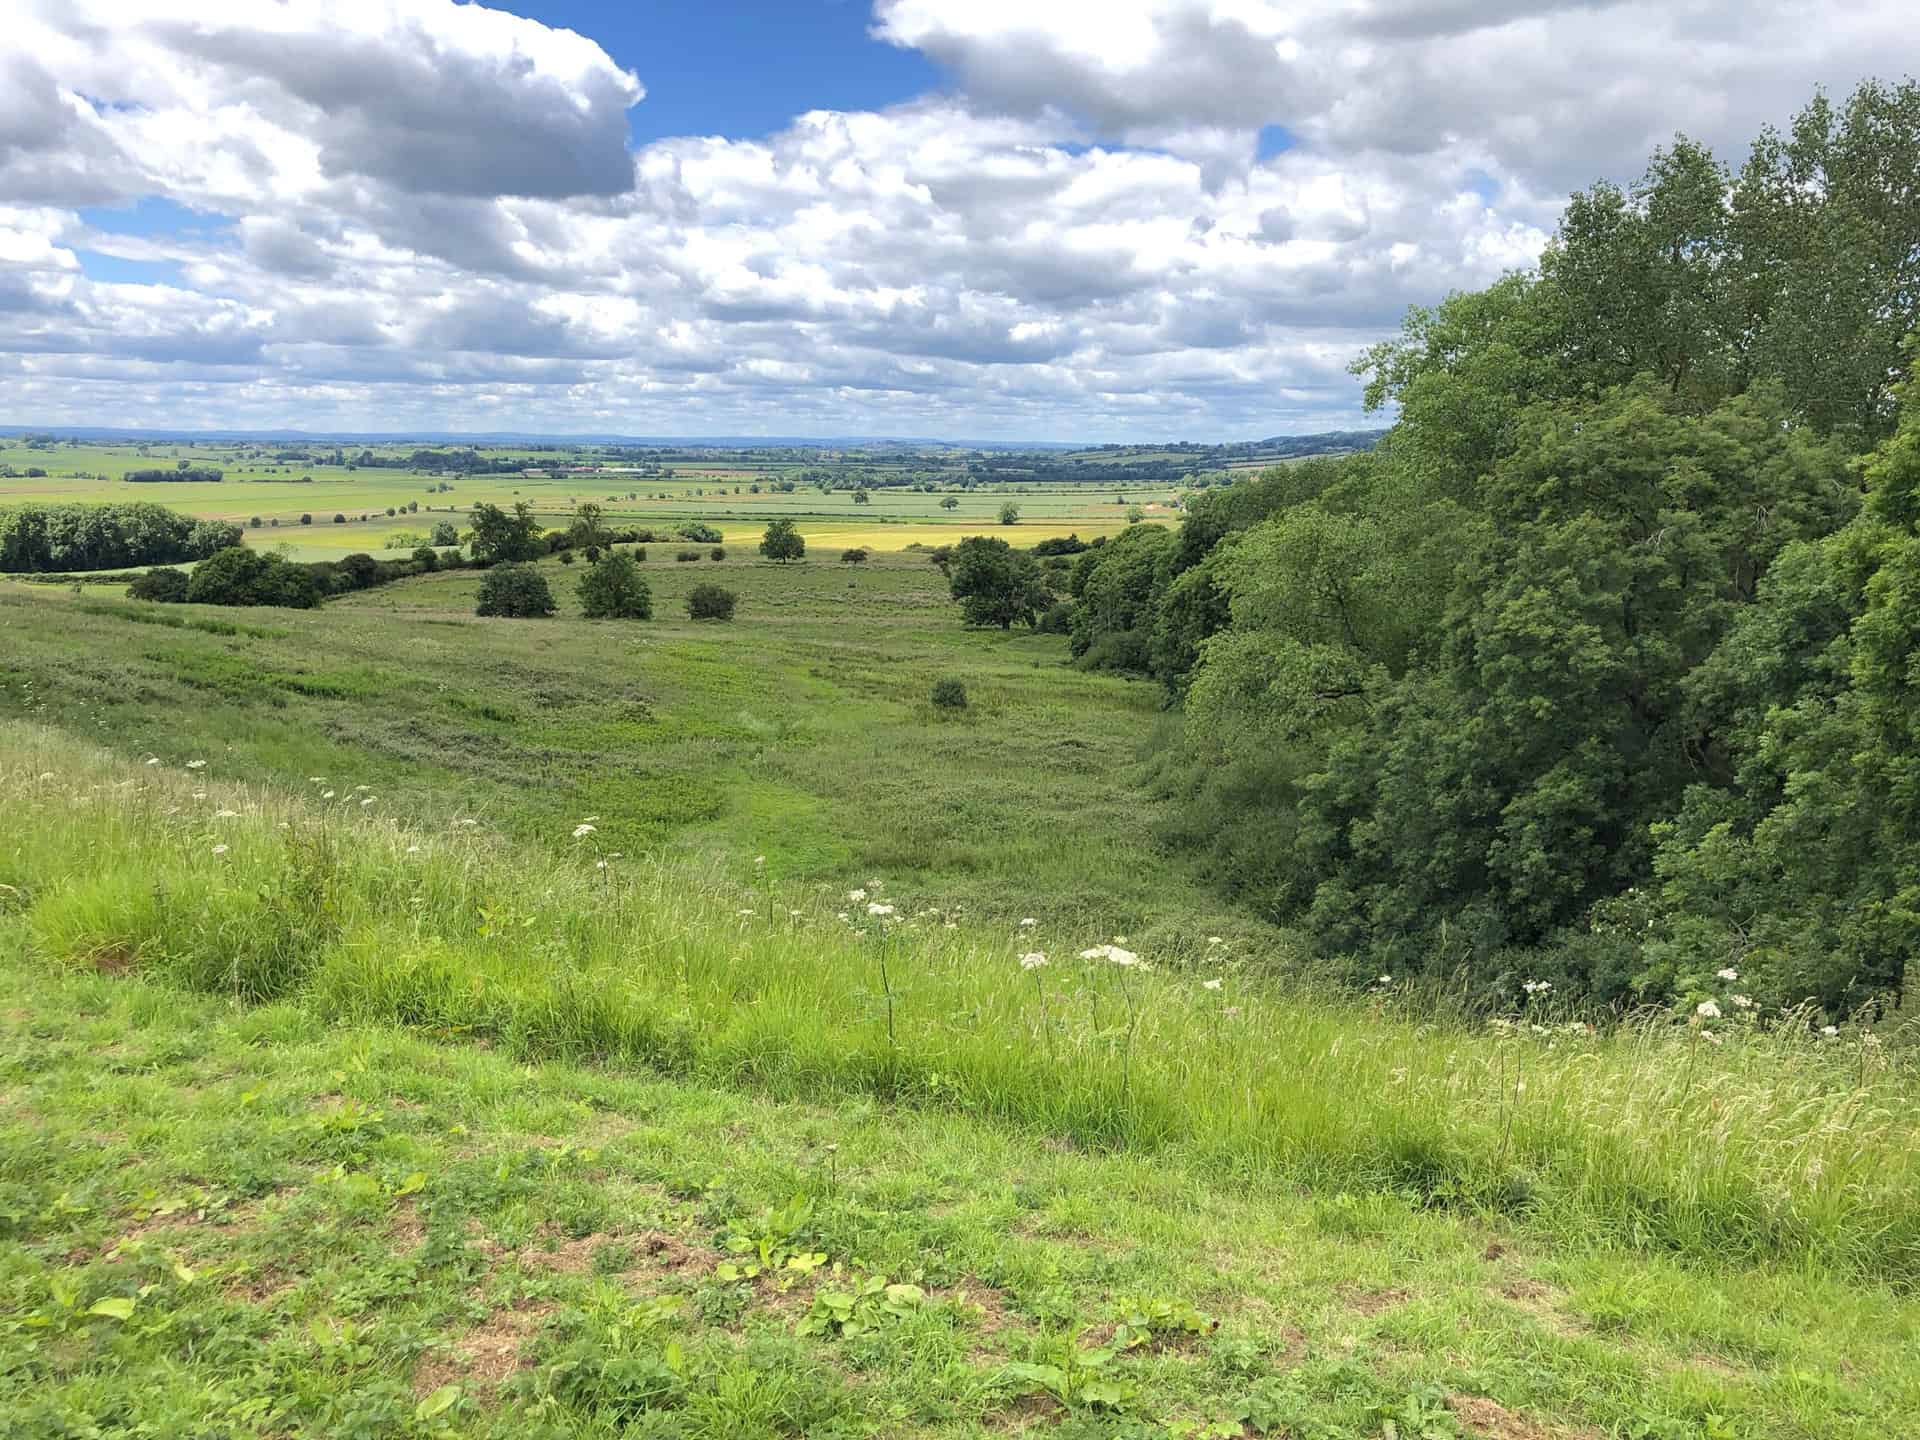 The Howardian Hills boast rolling, wooded countryside with Jurassic limestone, pastures, and vast woodlands. Enjoy all this on your Sheriff Hutton walk.